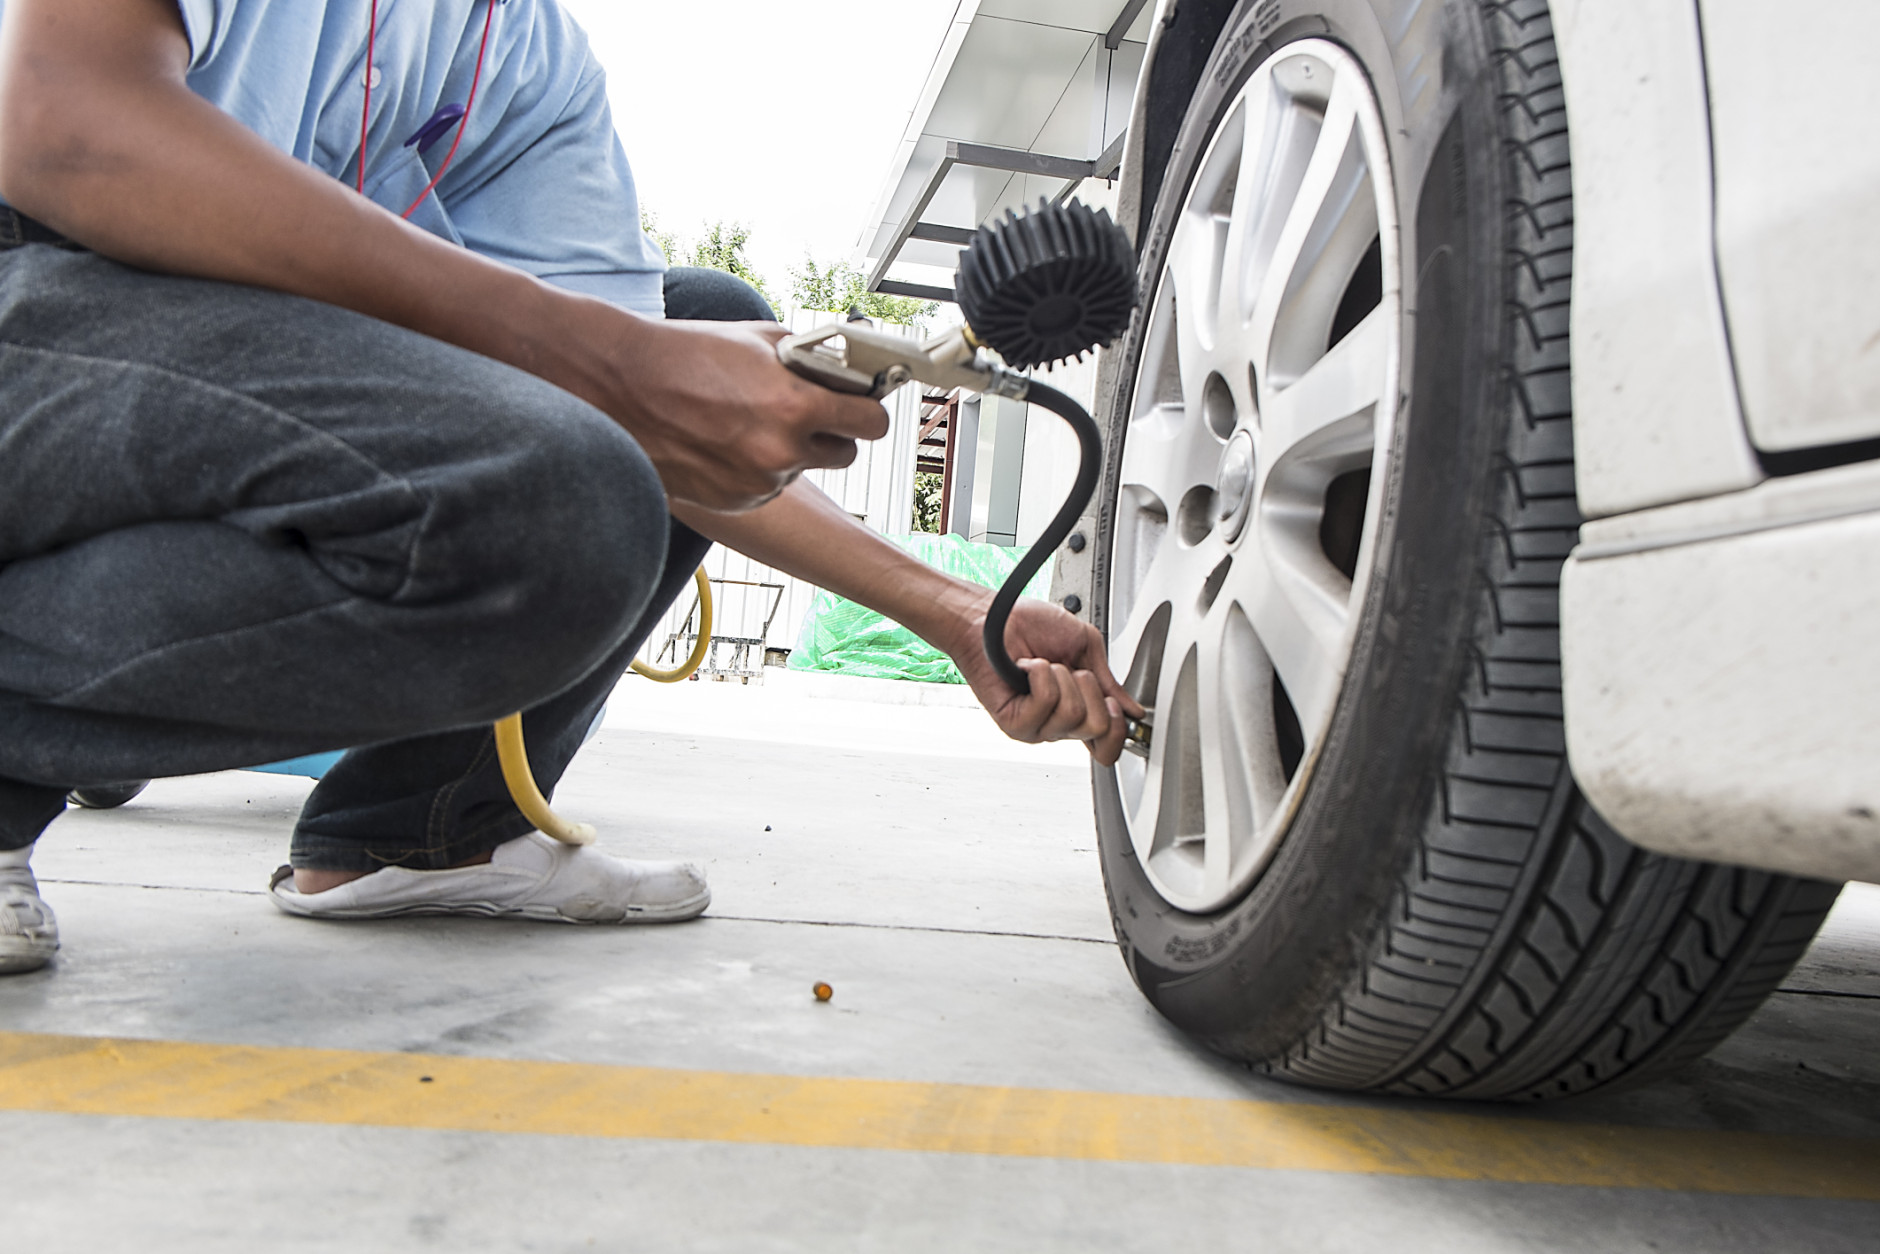 Cold weather robs air from tires. “I had to do my wife’s car three times because the light would come on," Bonds said. "It gets a little colder. It might take two or three trips to air the tires up and you’ll be good to go.” (Thinkstock)